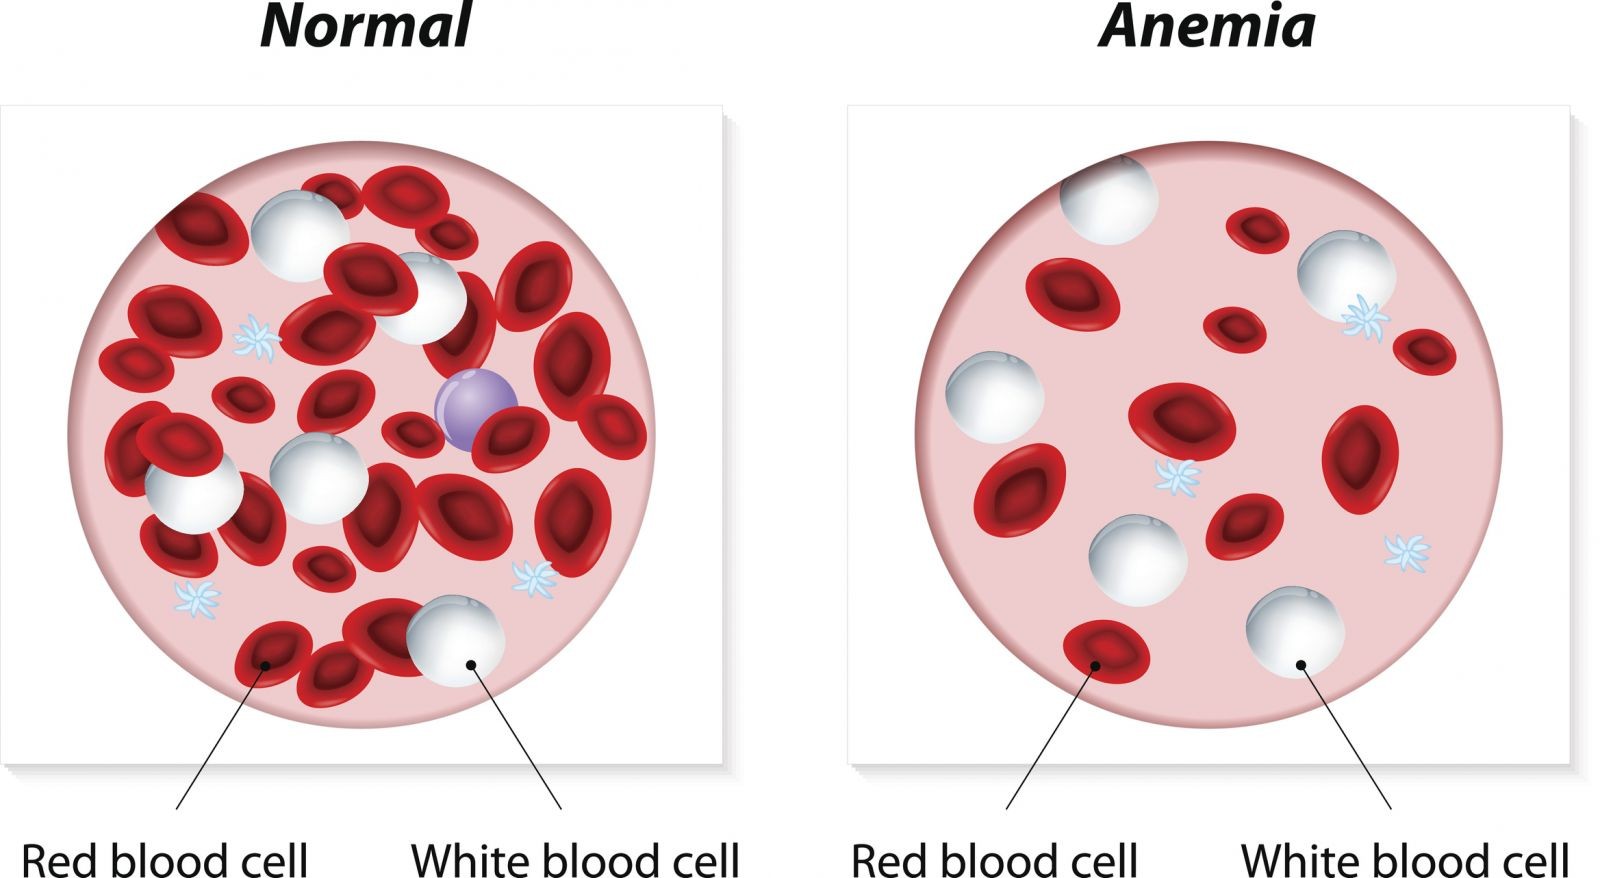 Anemia is a condition in which you lack enough healthy red blood cells to carry adequate oxygen to your body's tissues. Having anemia can make you feel tired and weak. There are many forms of anemia, each with its own cause.